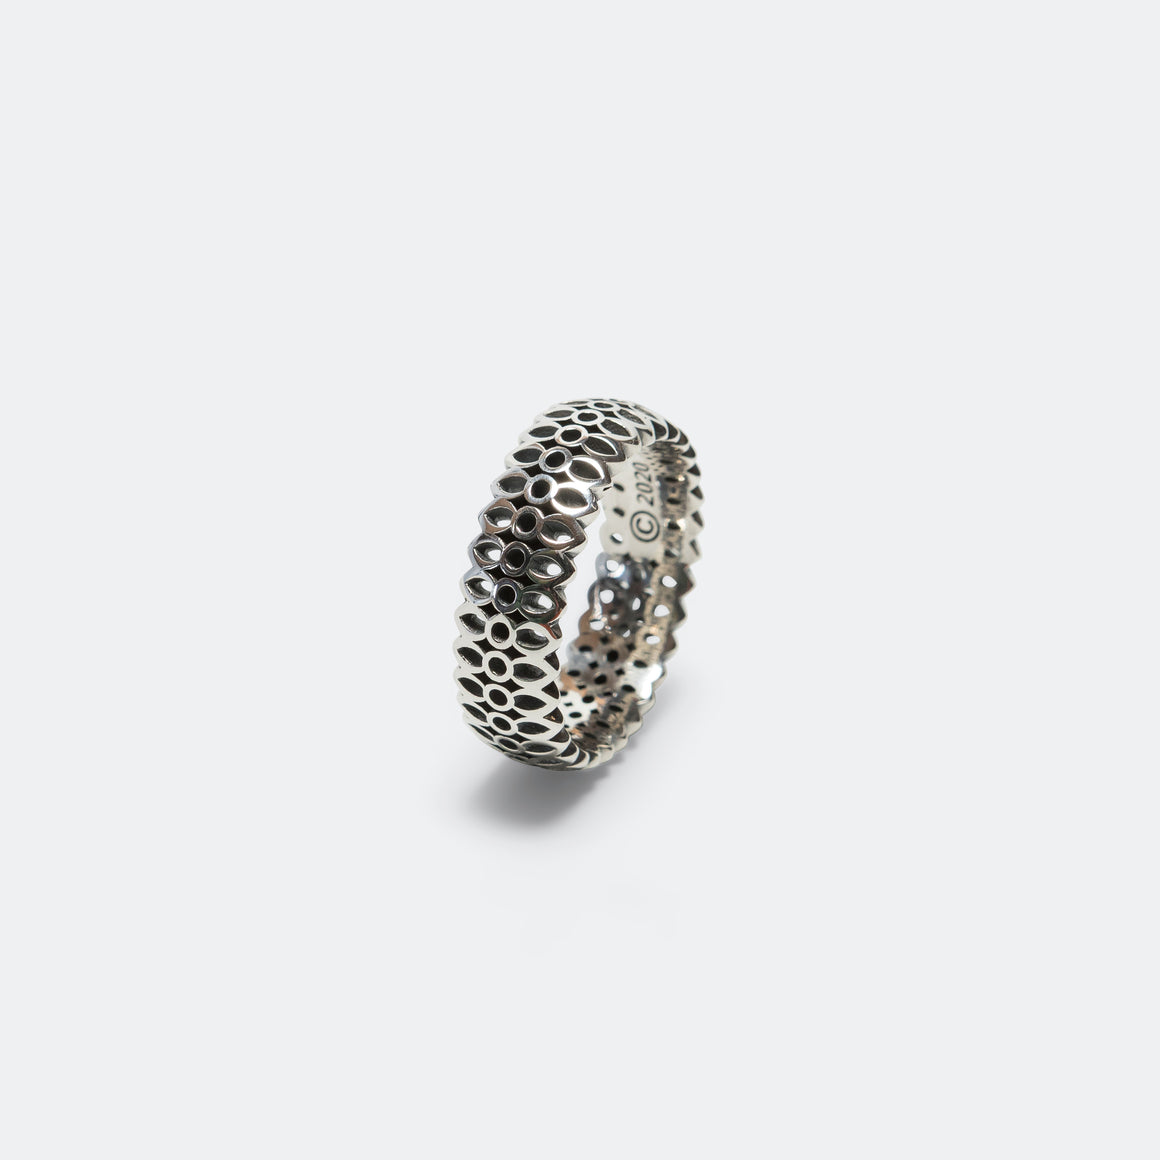 Model 25 Ring Small - 925 Silver